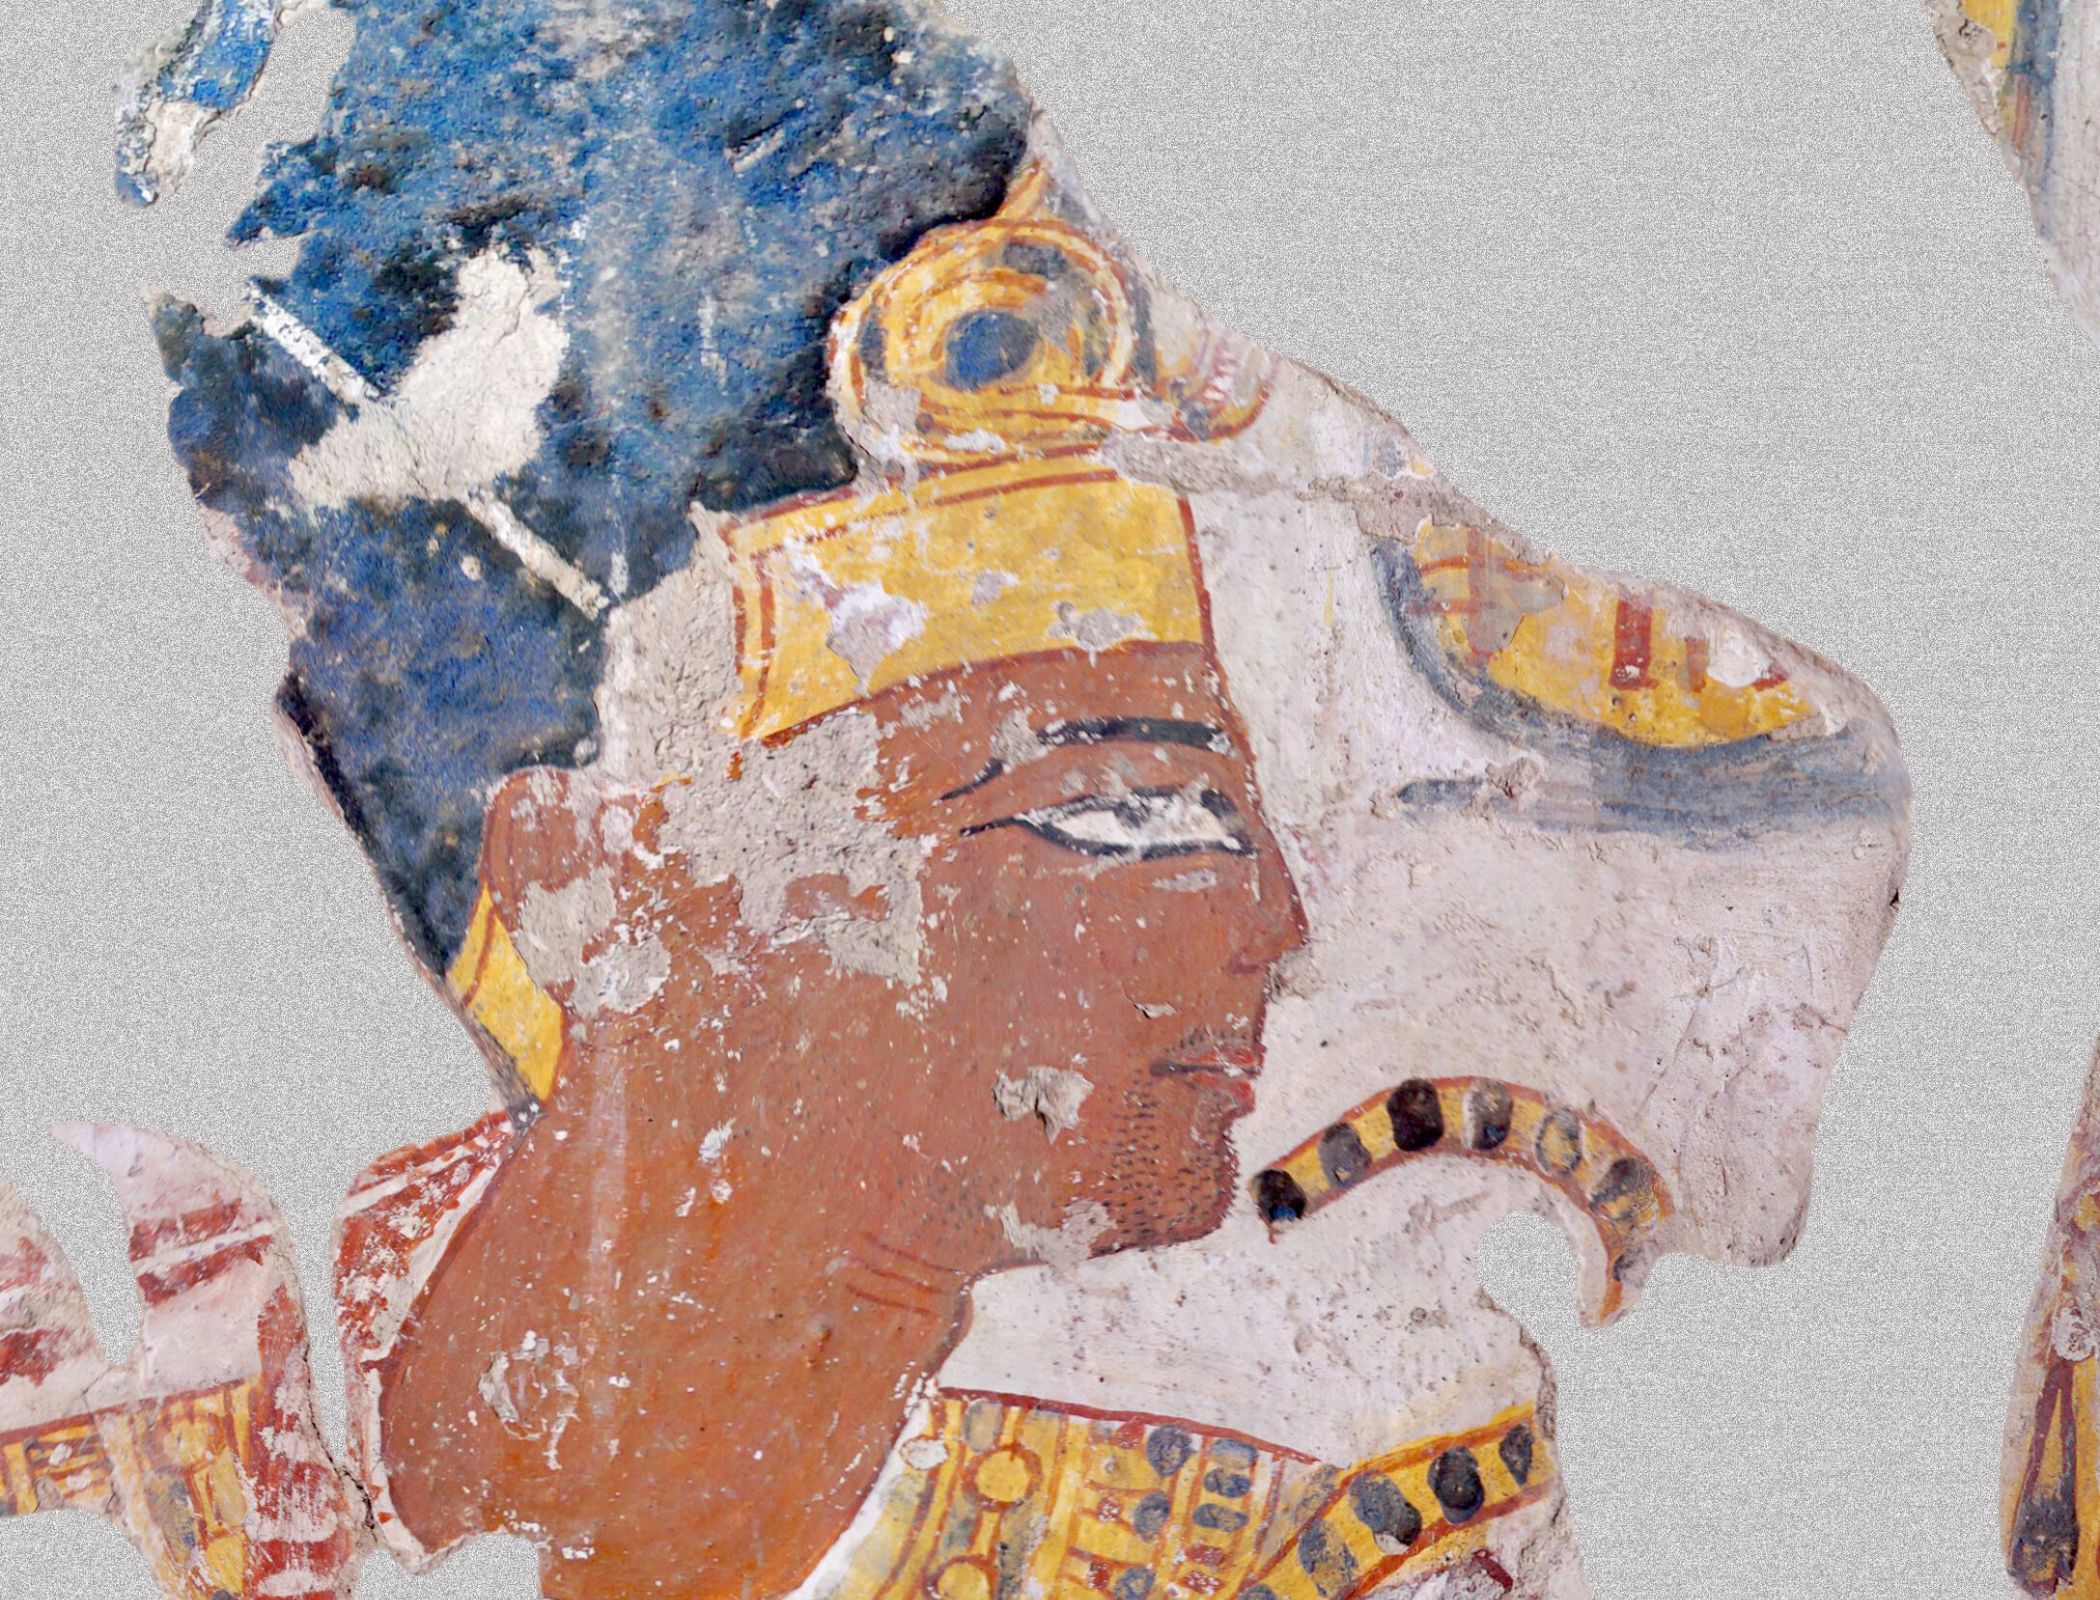 Secrets of Egyptian paintings uncovered by chemical imaging